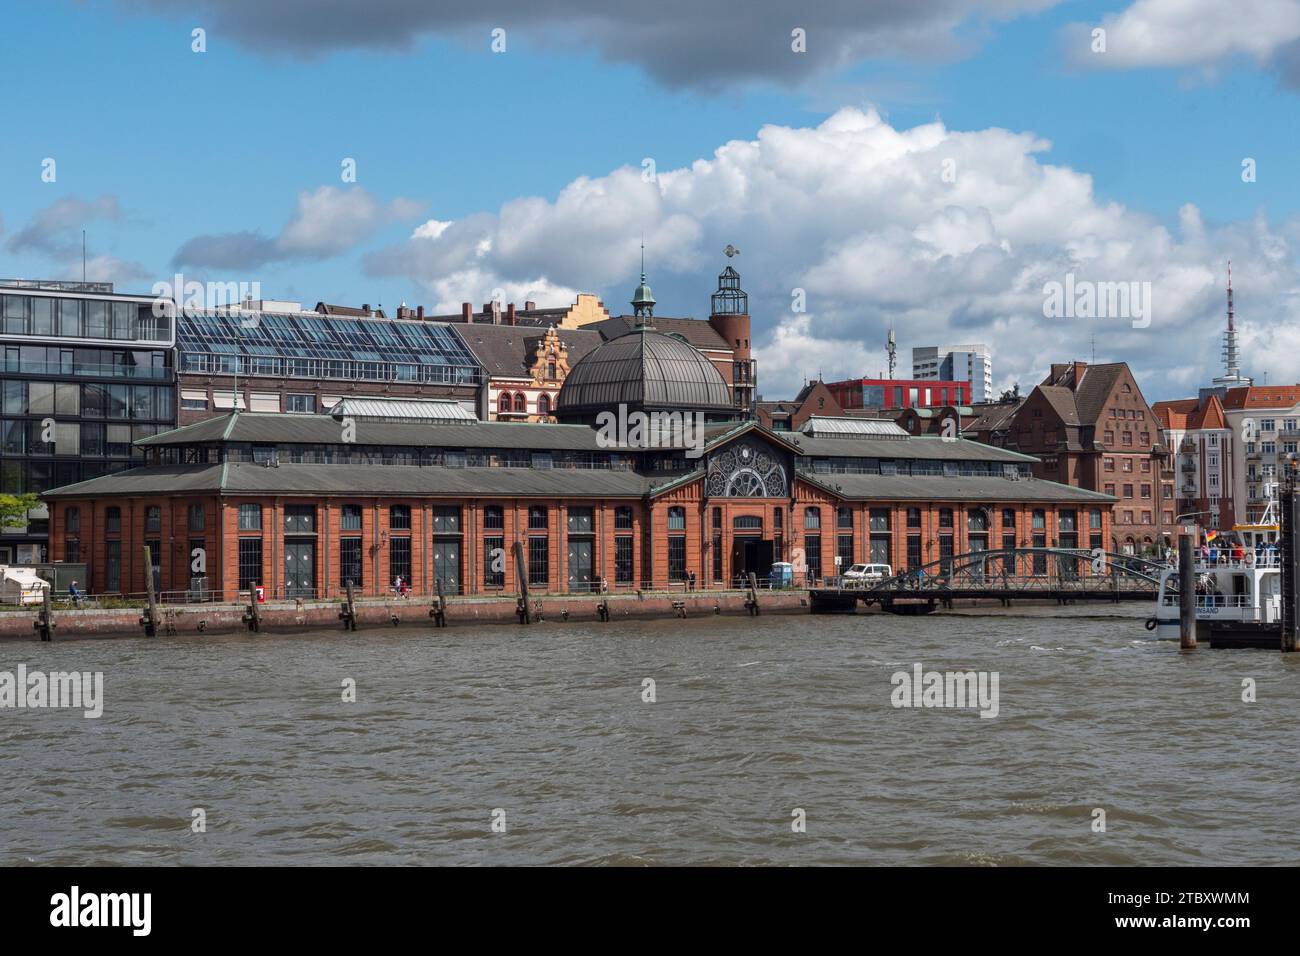 The Fish Auction Hall (Fischauktionshalle/Fischmarkt) in Altona, on the River Elbe, Hamburg, Germany. Stock Photo